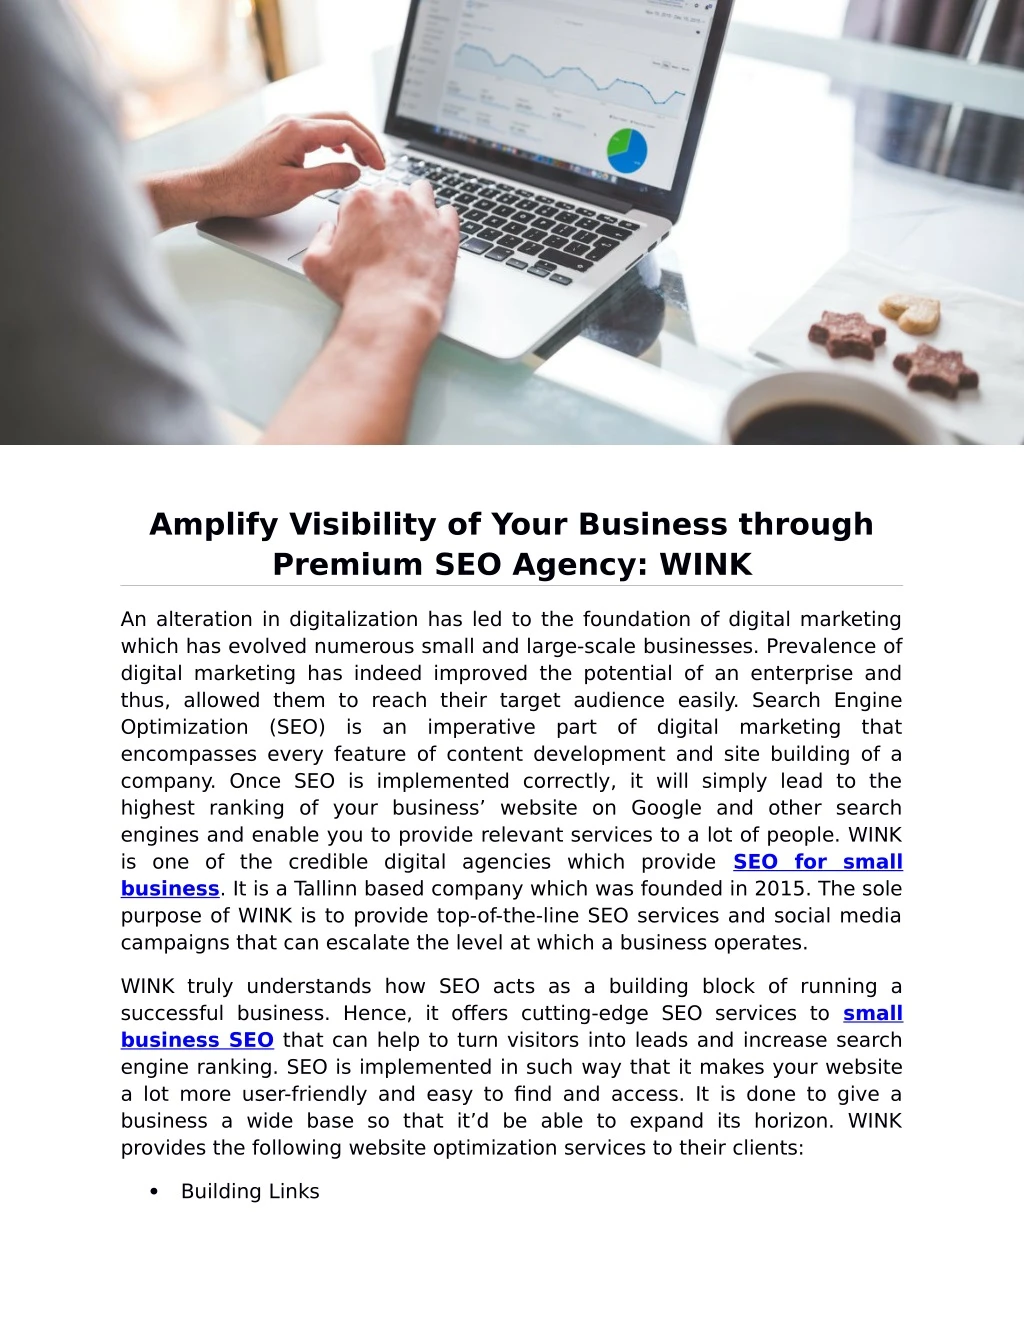 amplify visibility of your business through